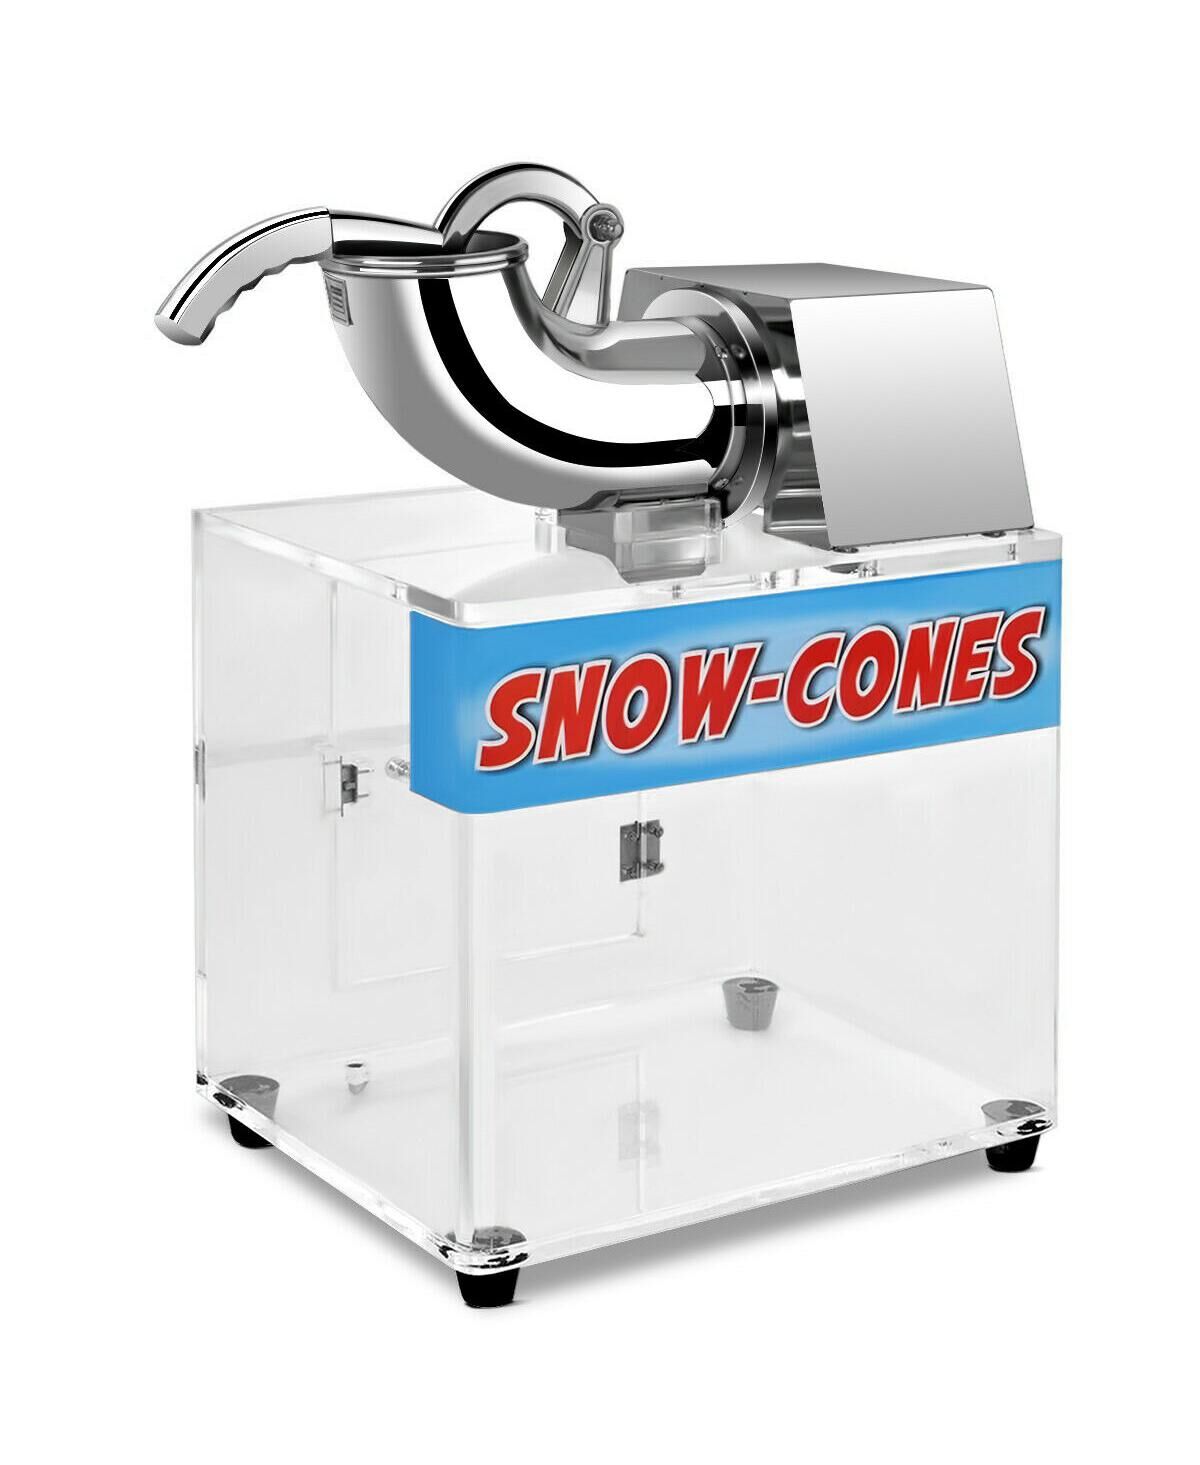 Costway Electric Snow Cone Machine Ice Shaver Maker Shaving Crusher Dual Blades - Silver